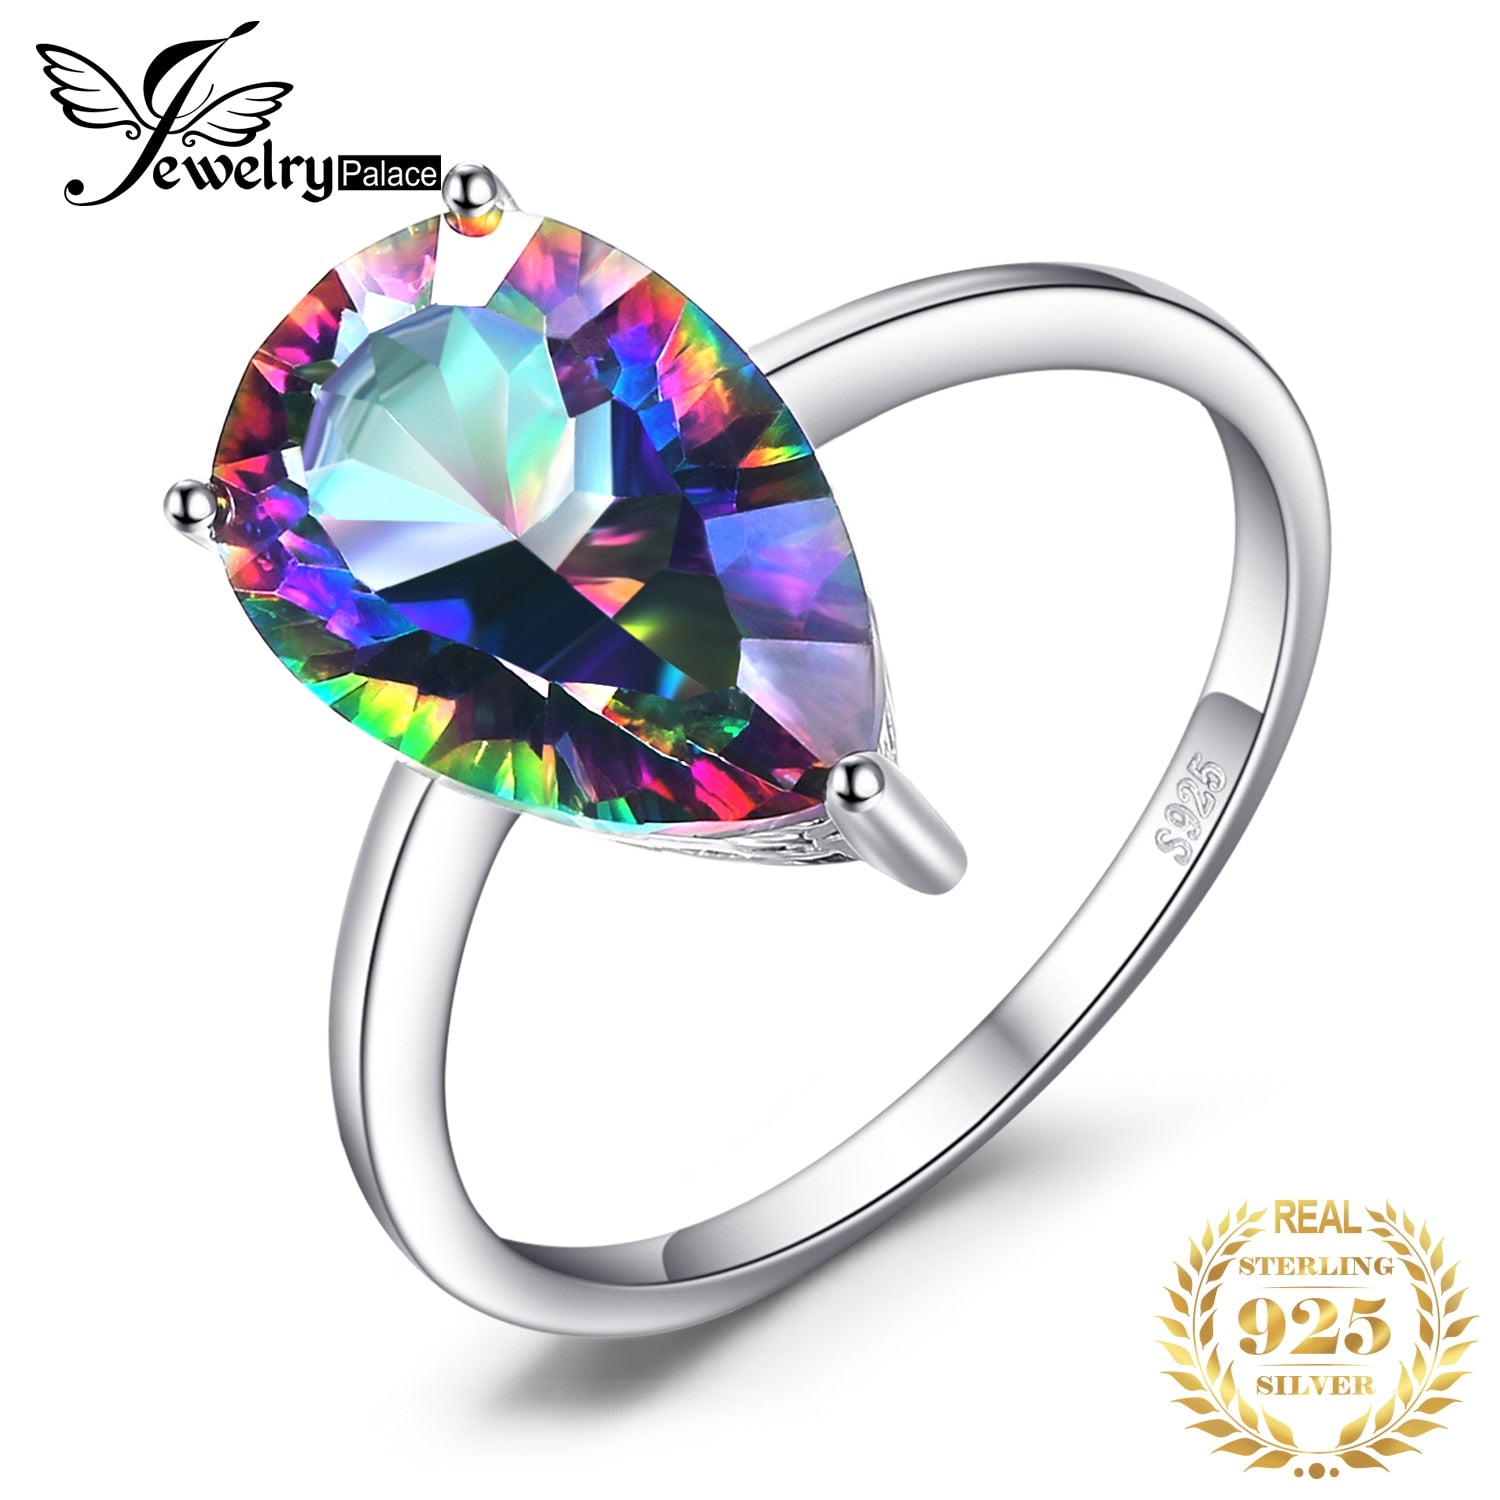 JewelryPalace 3.6ct Rainbow Mystic Quartz 925 Sterling Silver Engagement Solitaire Ring for Woman Wedding Party Gift New Arrival